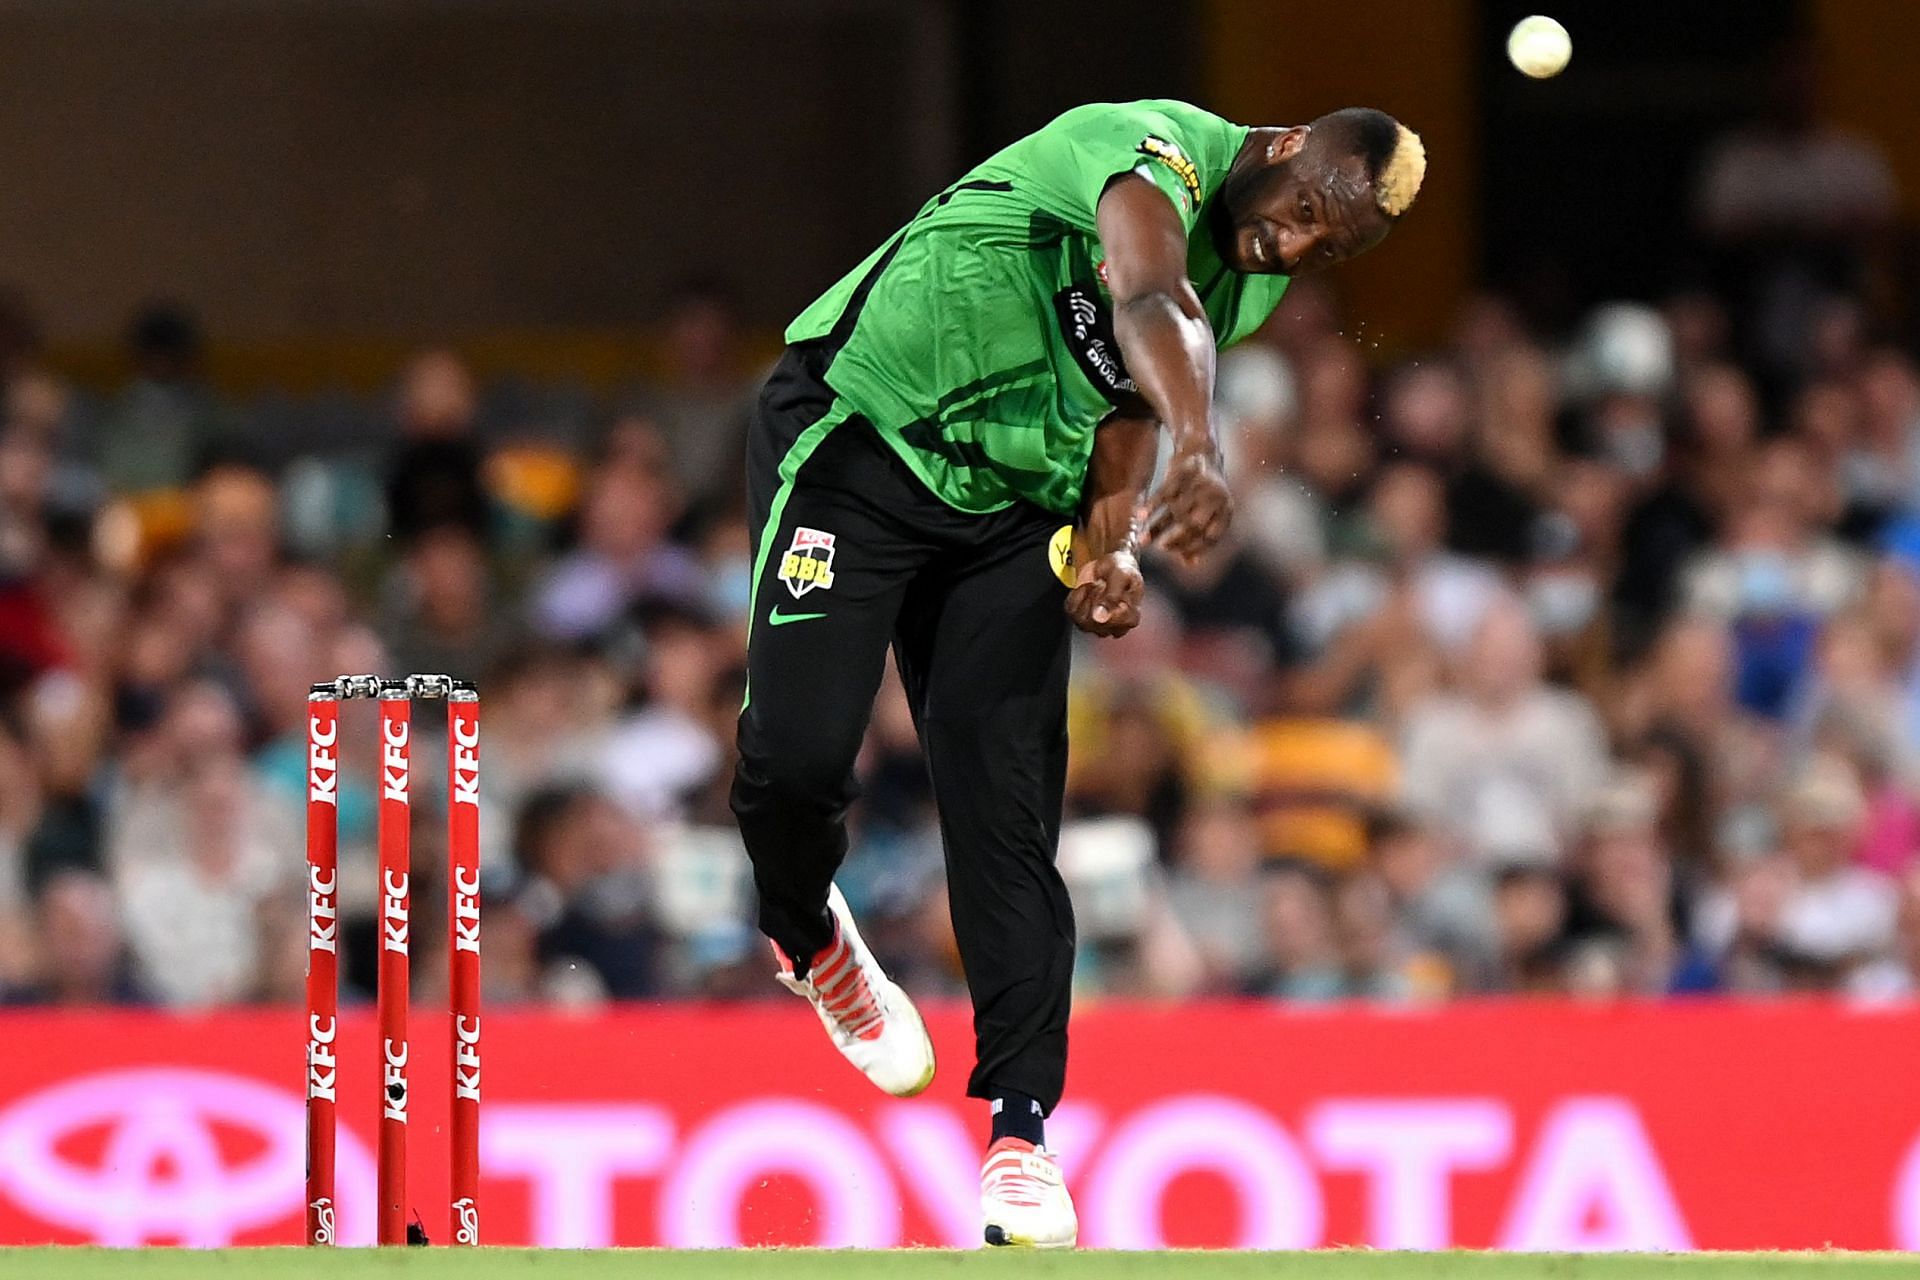 Andre Russell bowling in the BBL. Pic: Getty Images